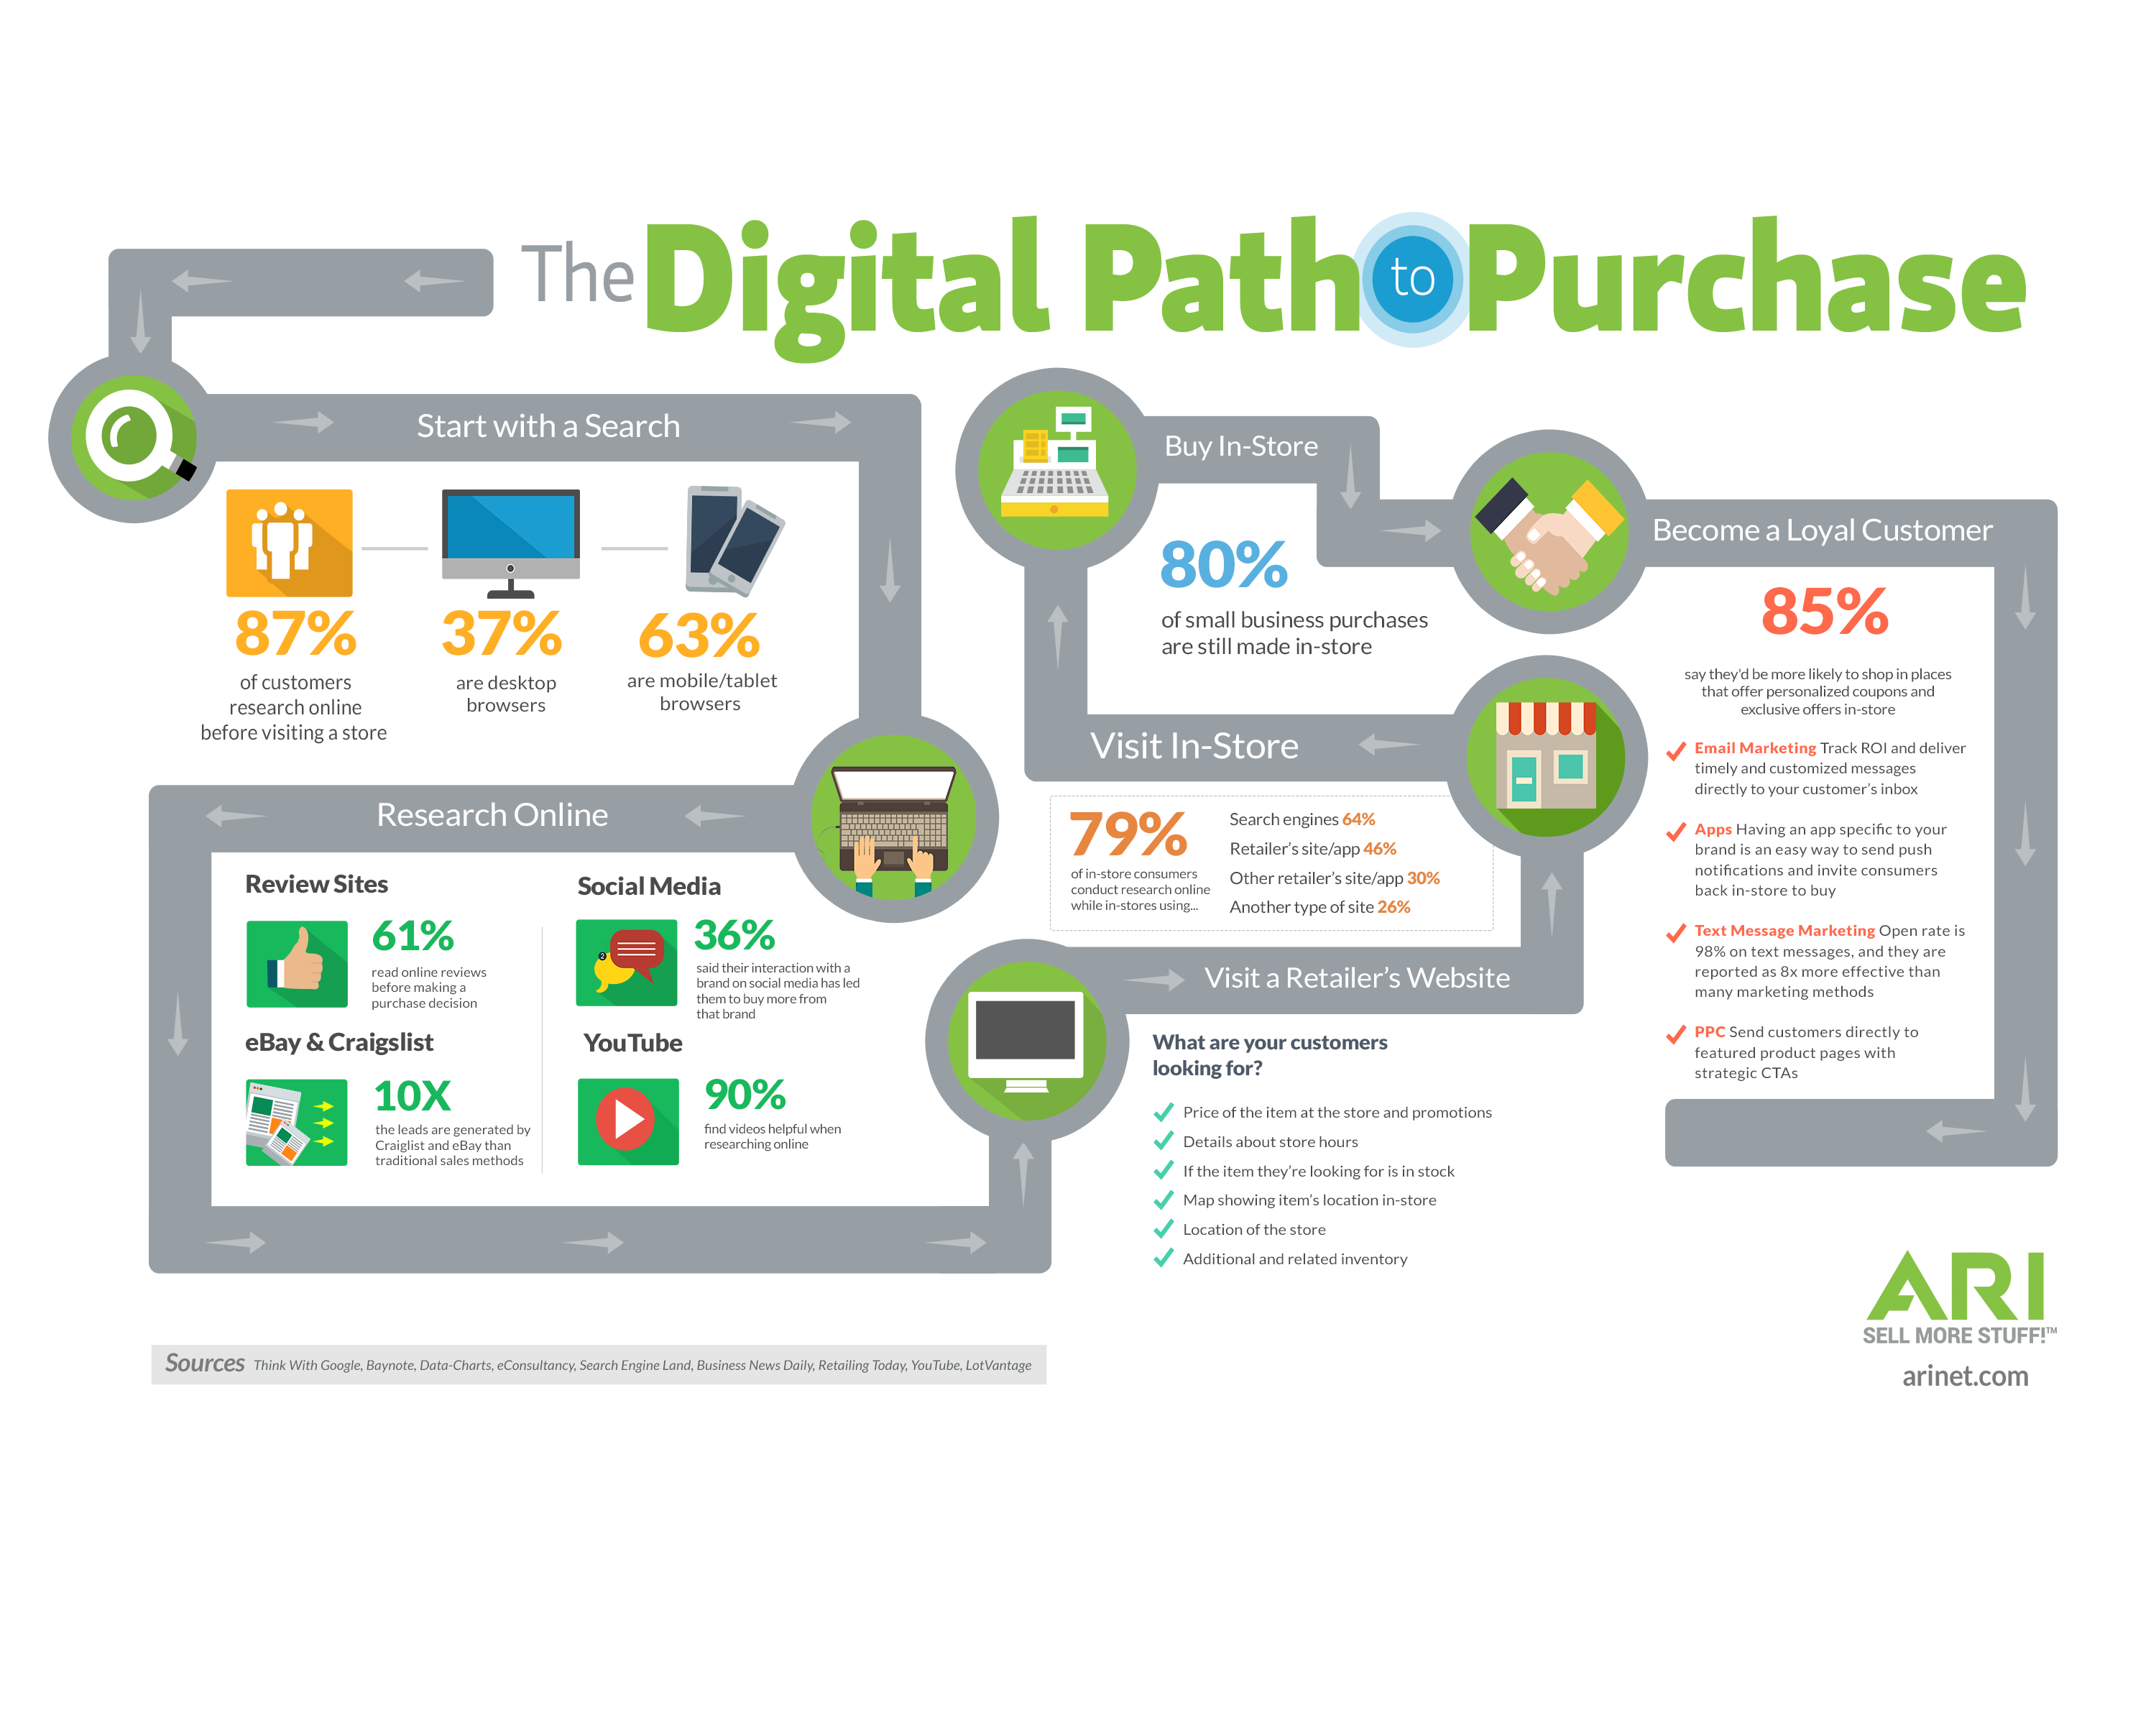 The Digital Path to Purchase